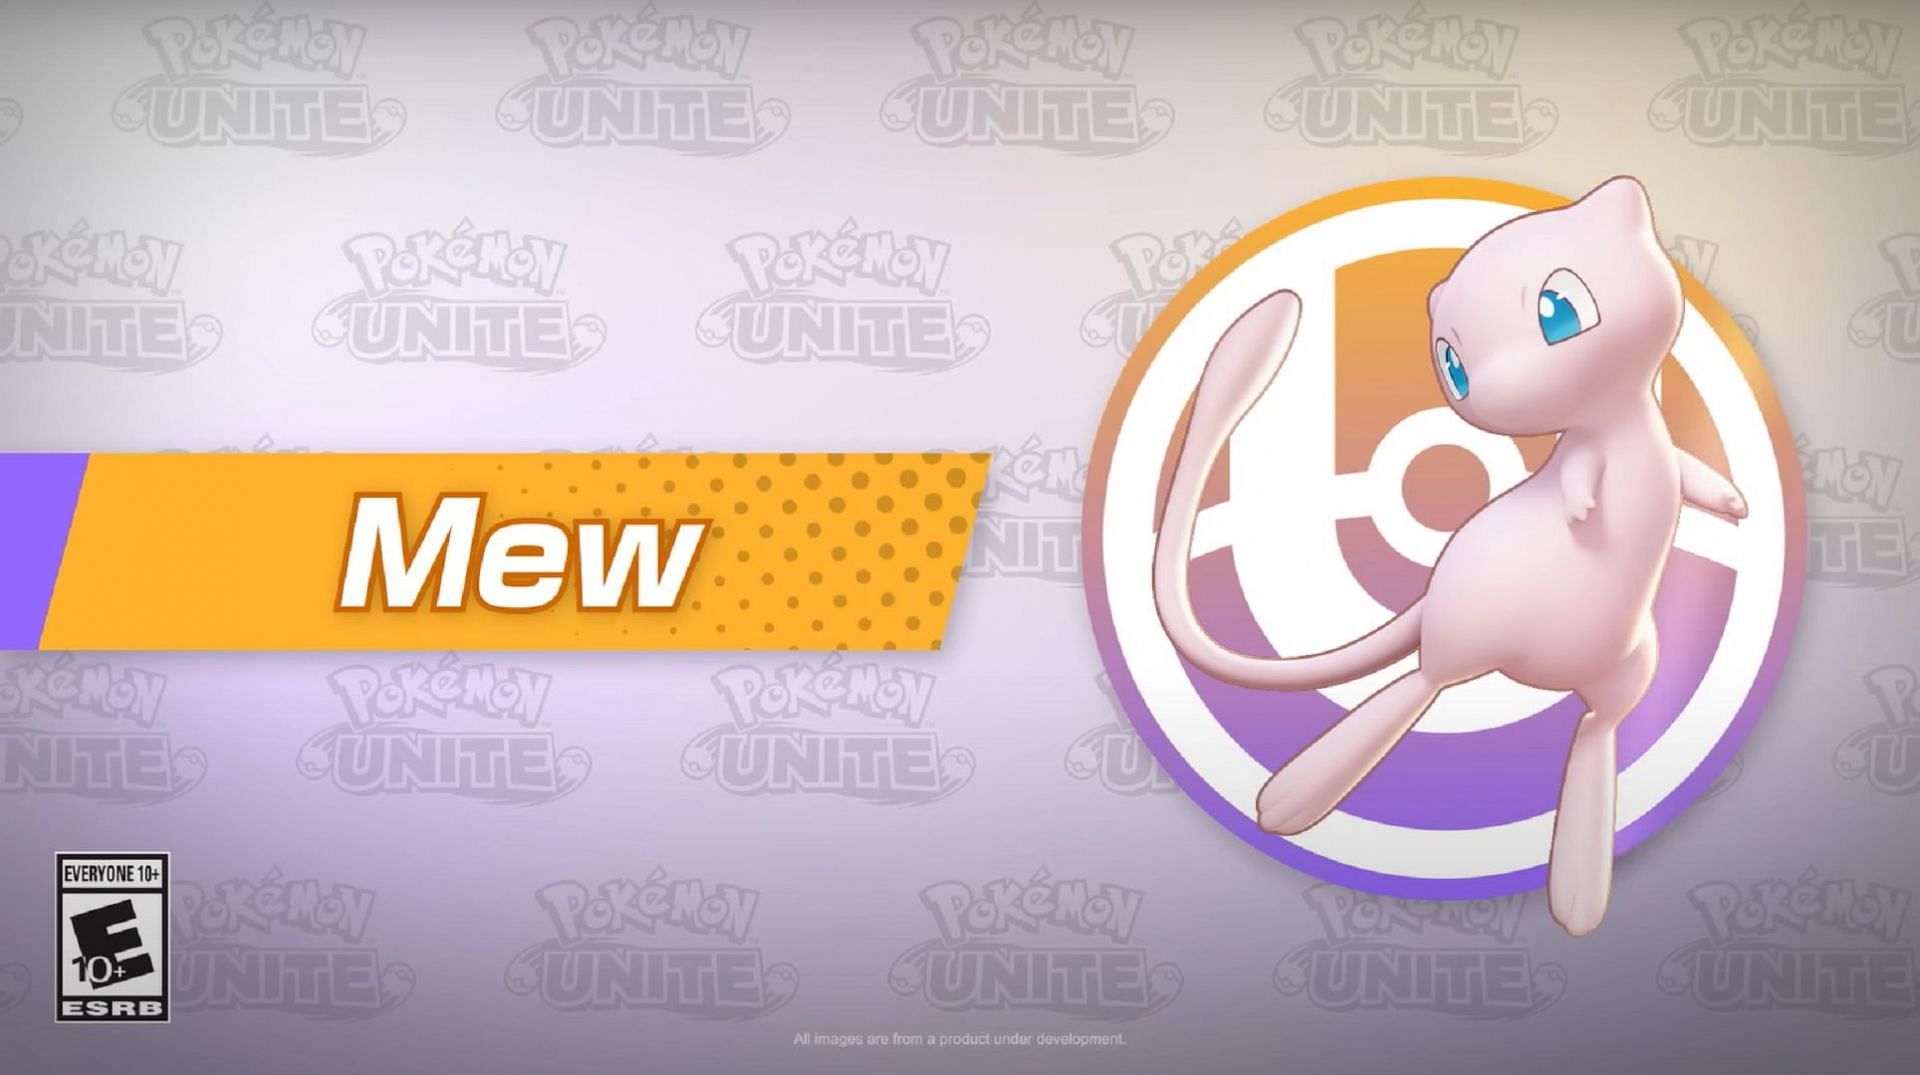 Mew is the newest addition to Pokemon Unite